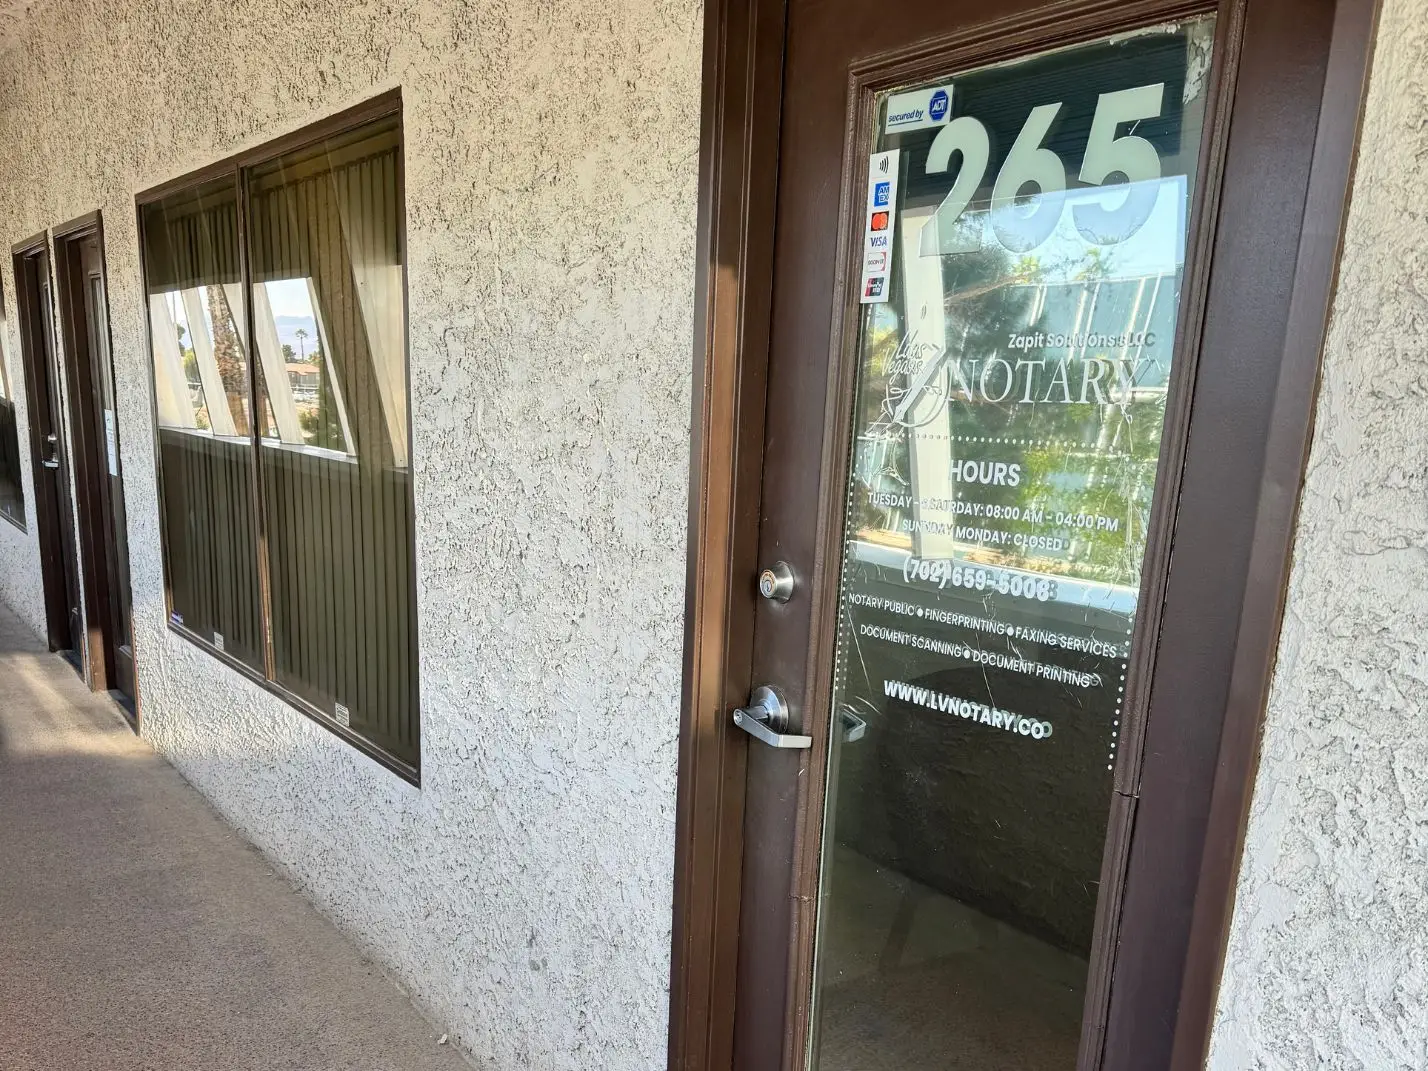 Entrance to Las Vegas Notary office featuring a brown door with glass displaying business hours, services offered, and contact information.